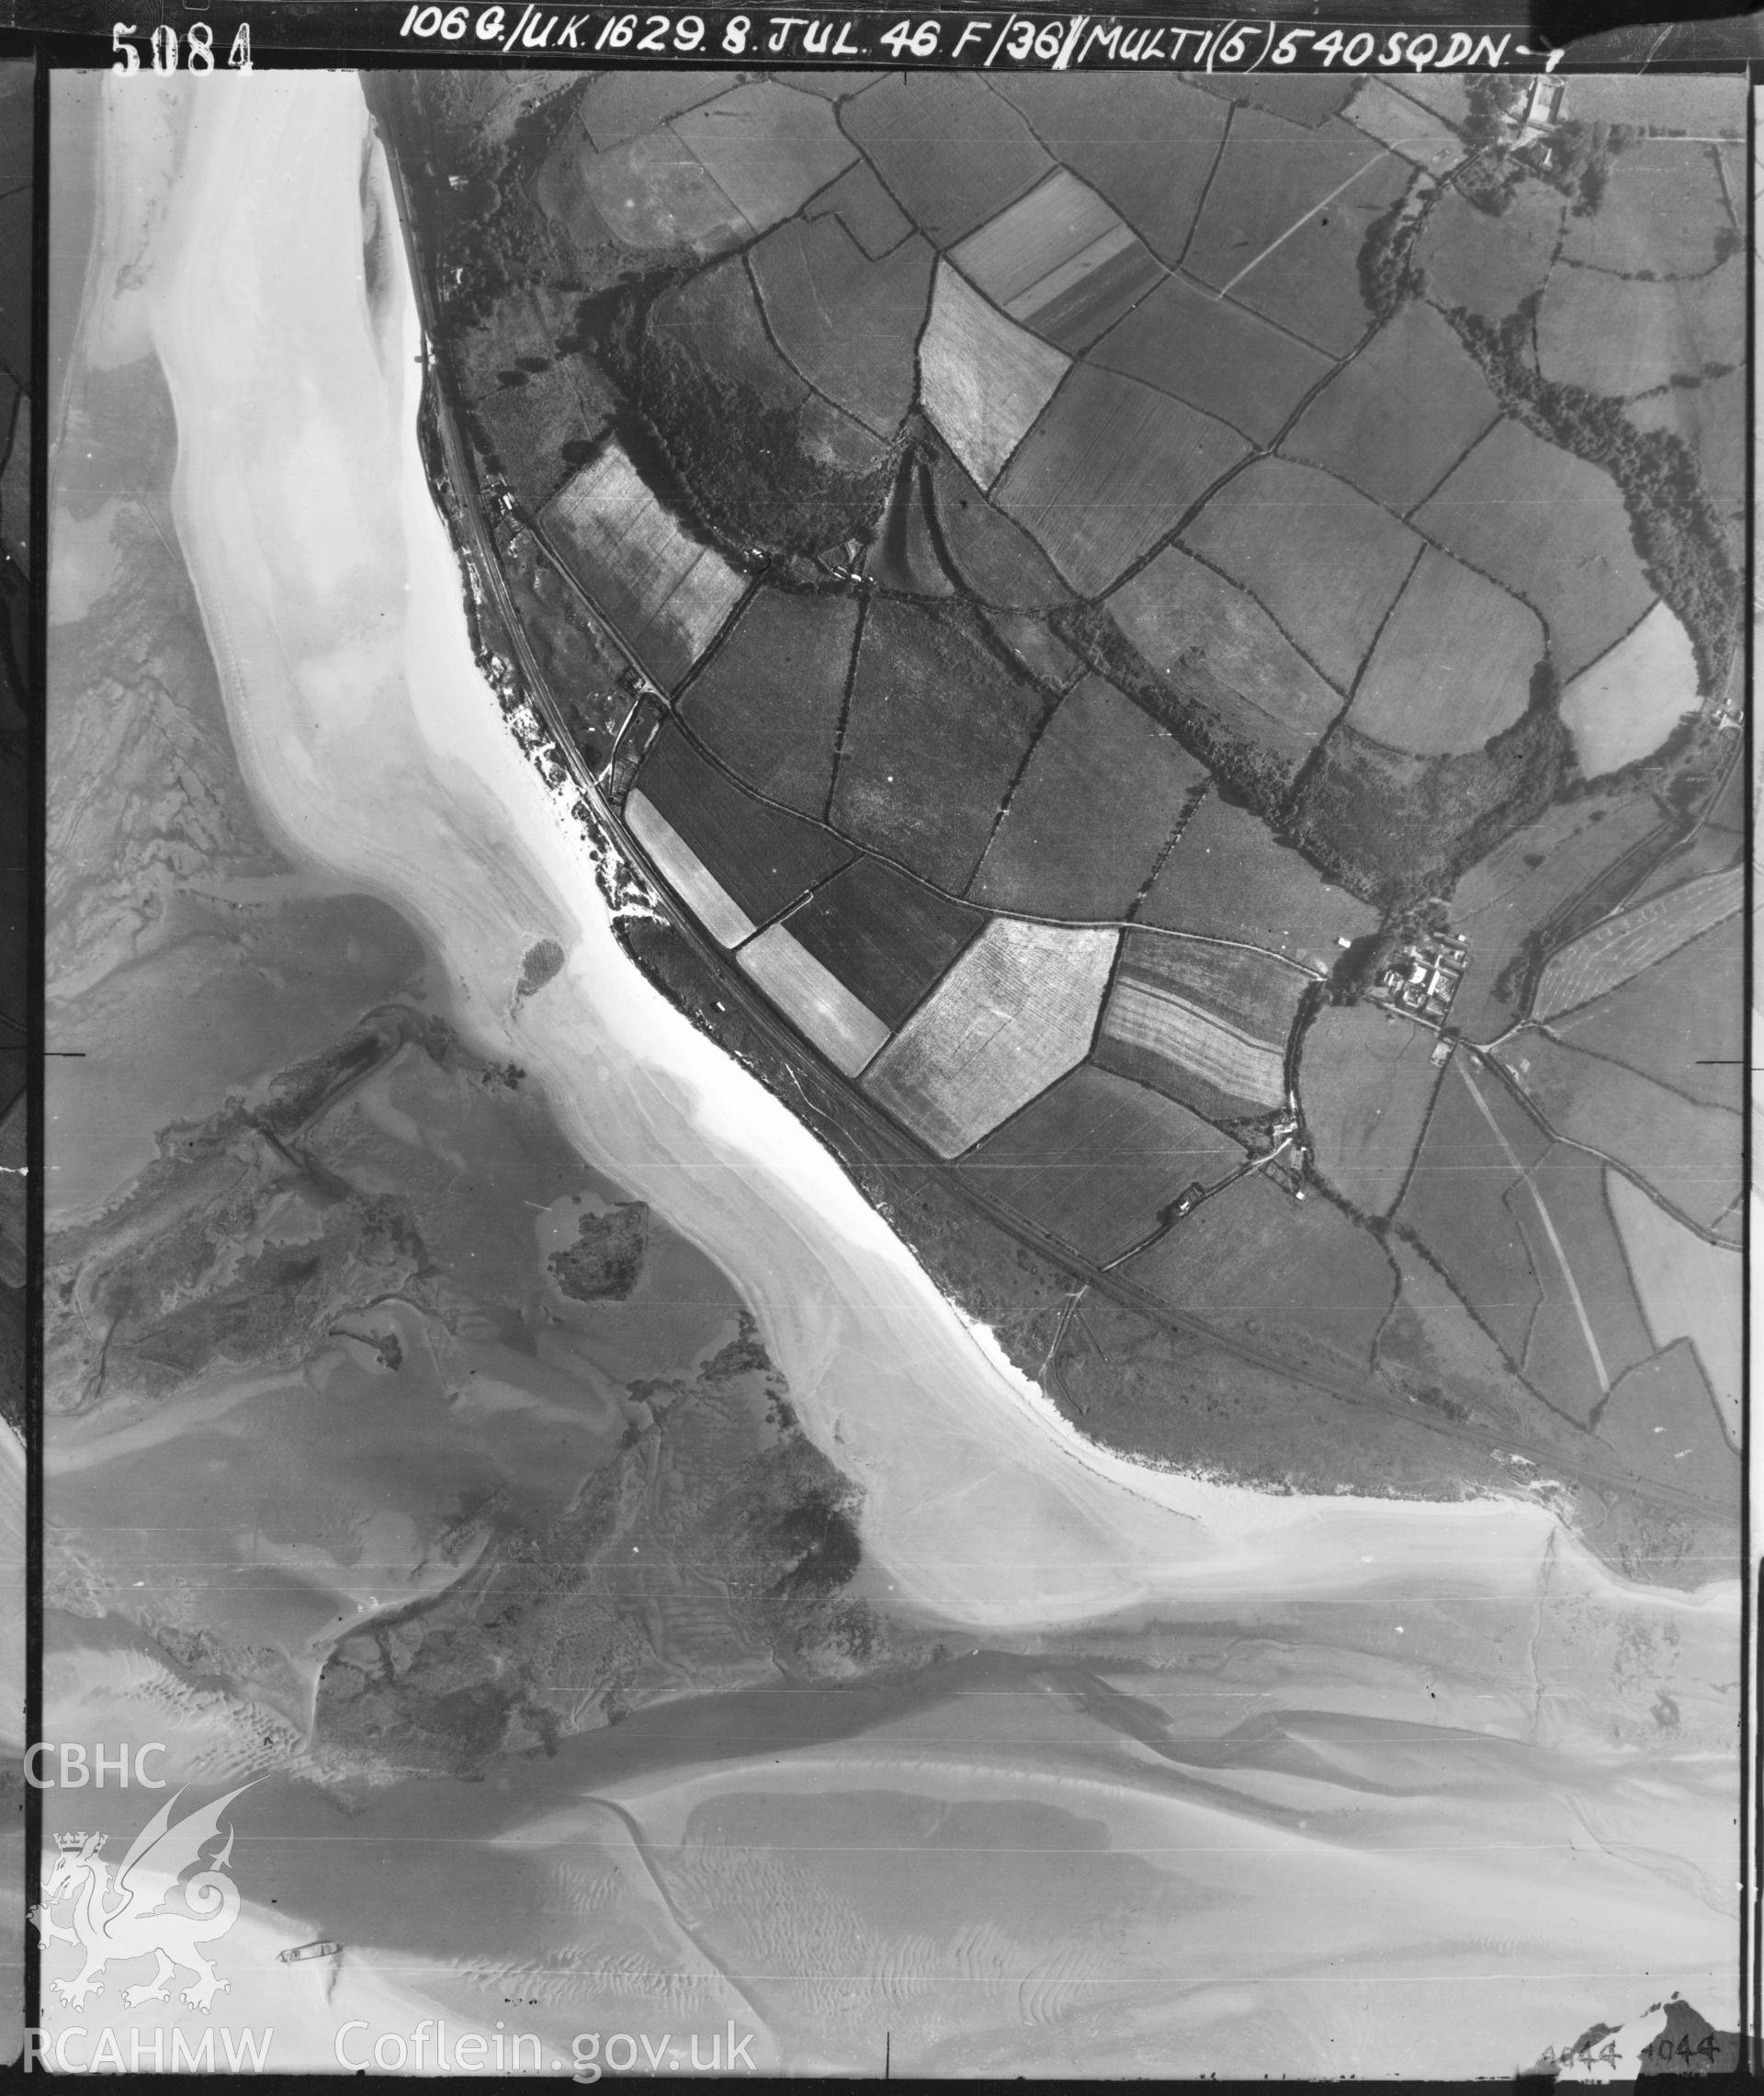 Digital copy of an aerial view of area SN359070. taken by RAF.  View of maritime sites, Fishtrap M, D and E, Salmon and Pastoun Scars, nprns 519273, 519274 and 519278. Paul Scar nprn 273652 and Unnamed wreck at Salmon Scar nprn 91388.